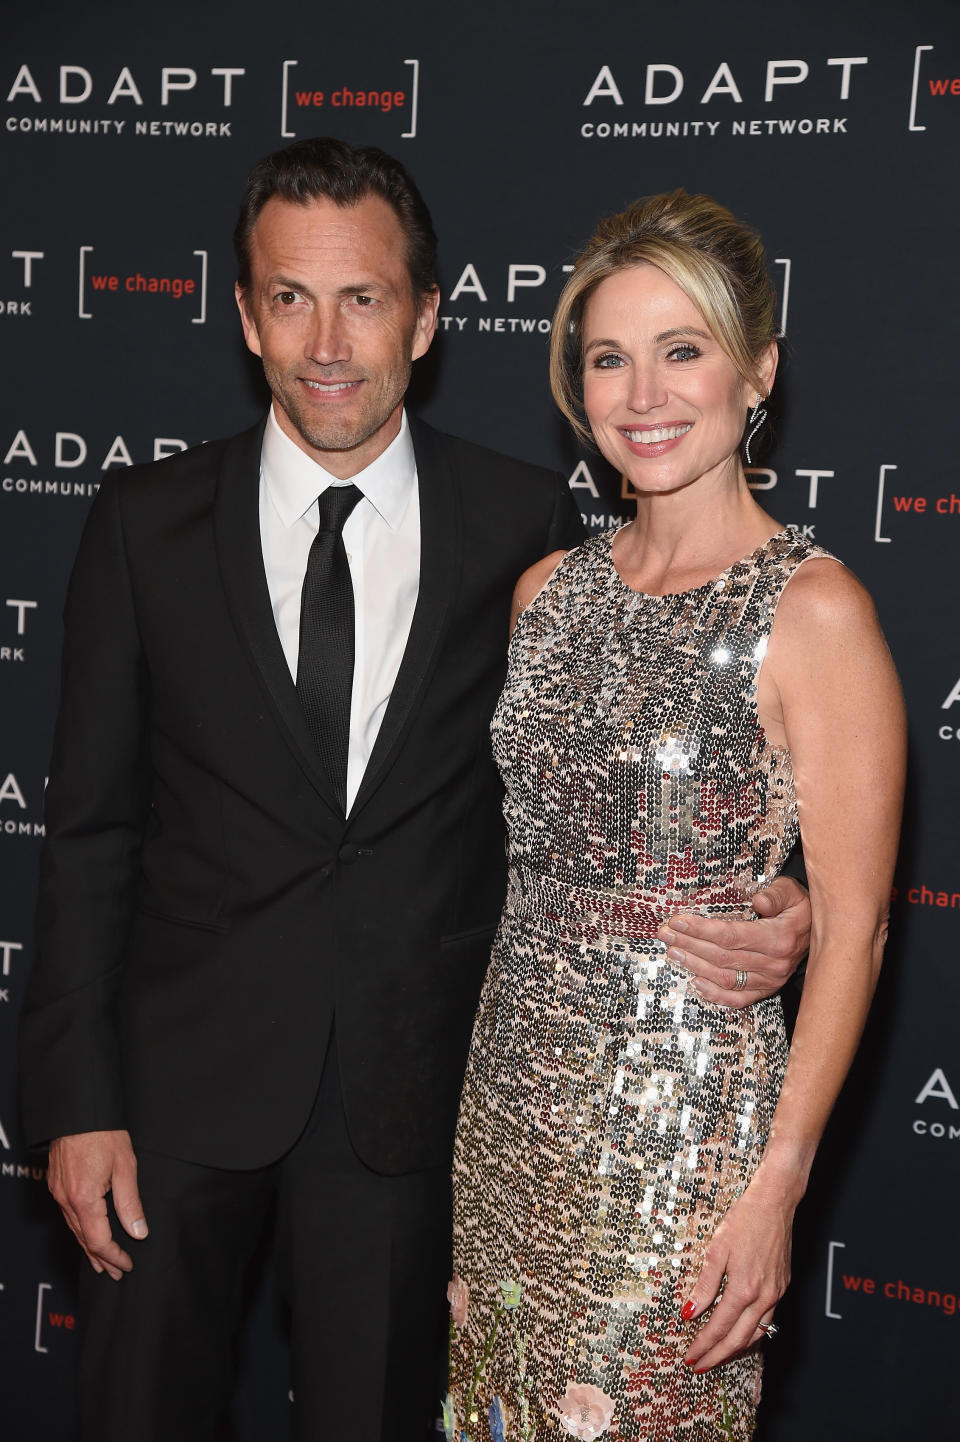 Amy Robach wears sequined dress with halter neck next to Andrew Shue